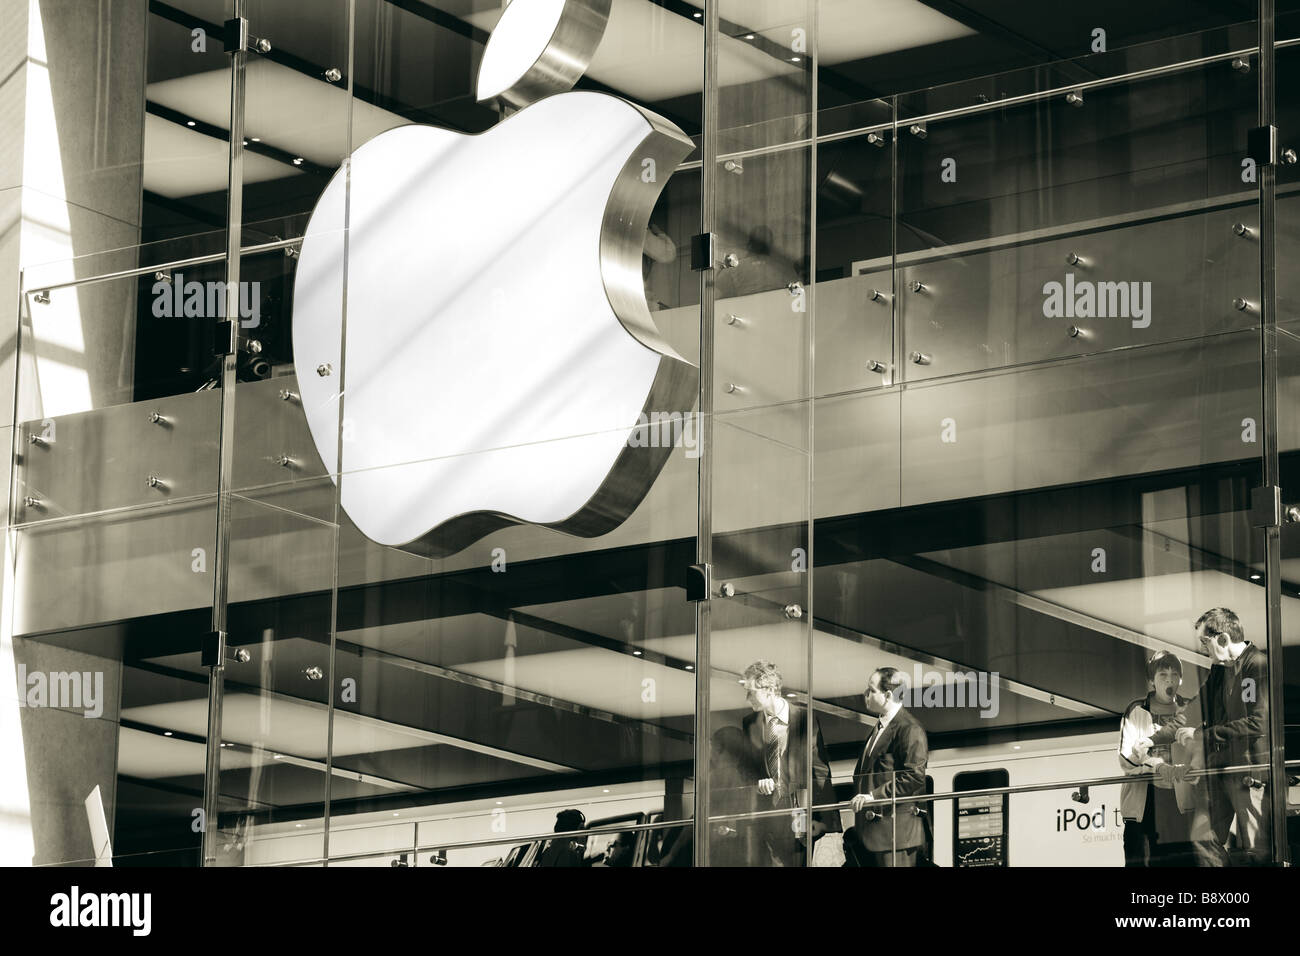 Business people and families are both shopping at the Sydney Apple Store. Sydney NSW Australia. Black and white. Stock Photo